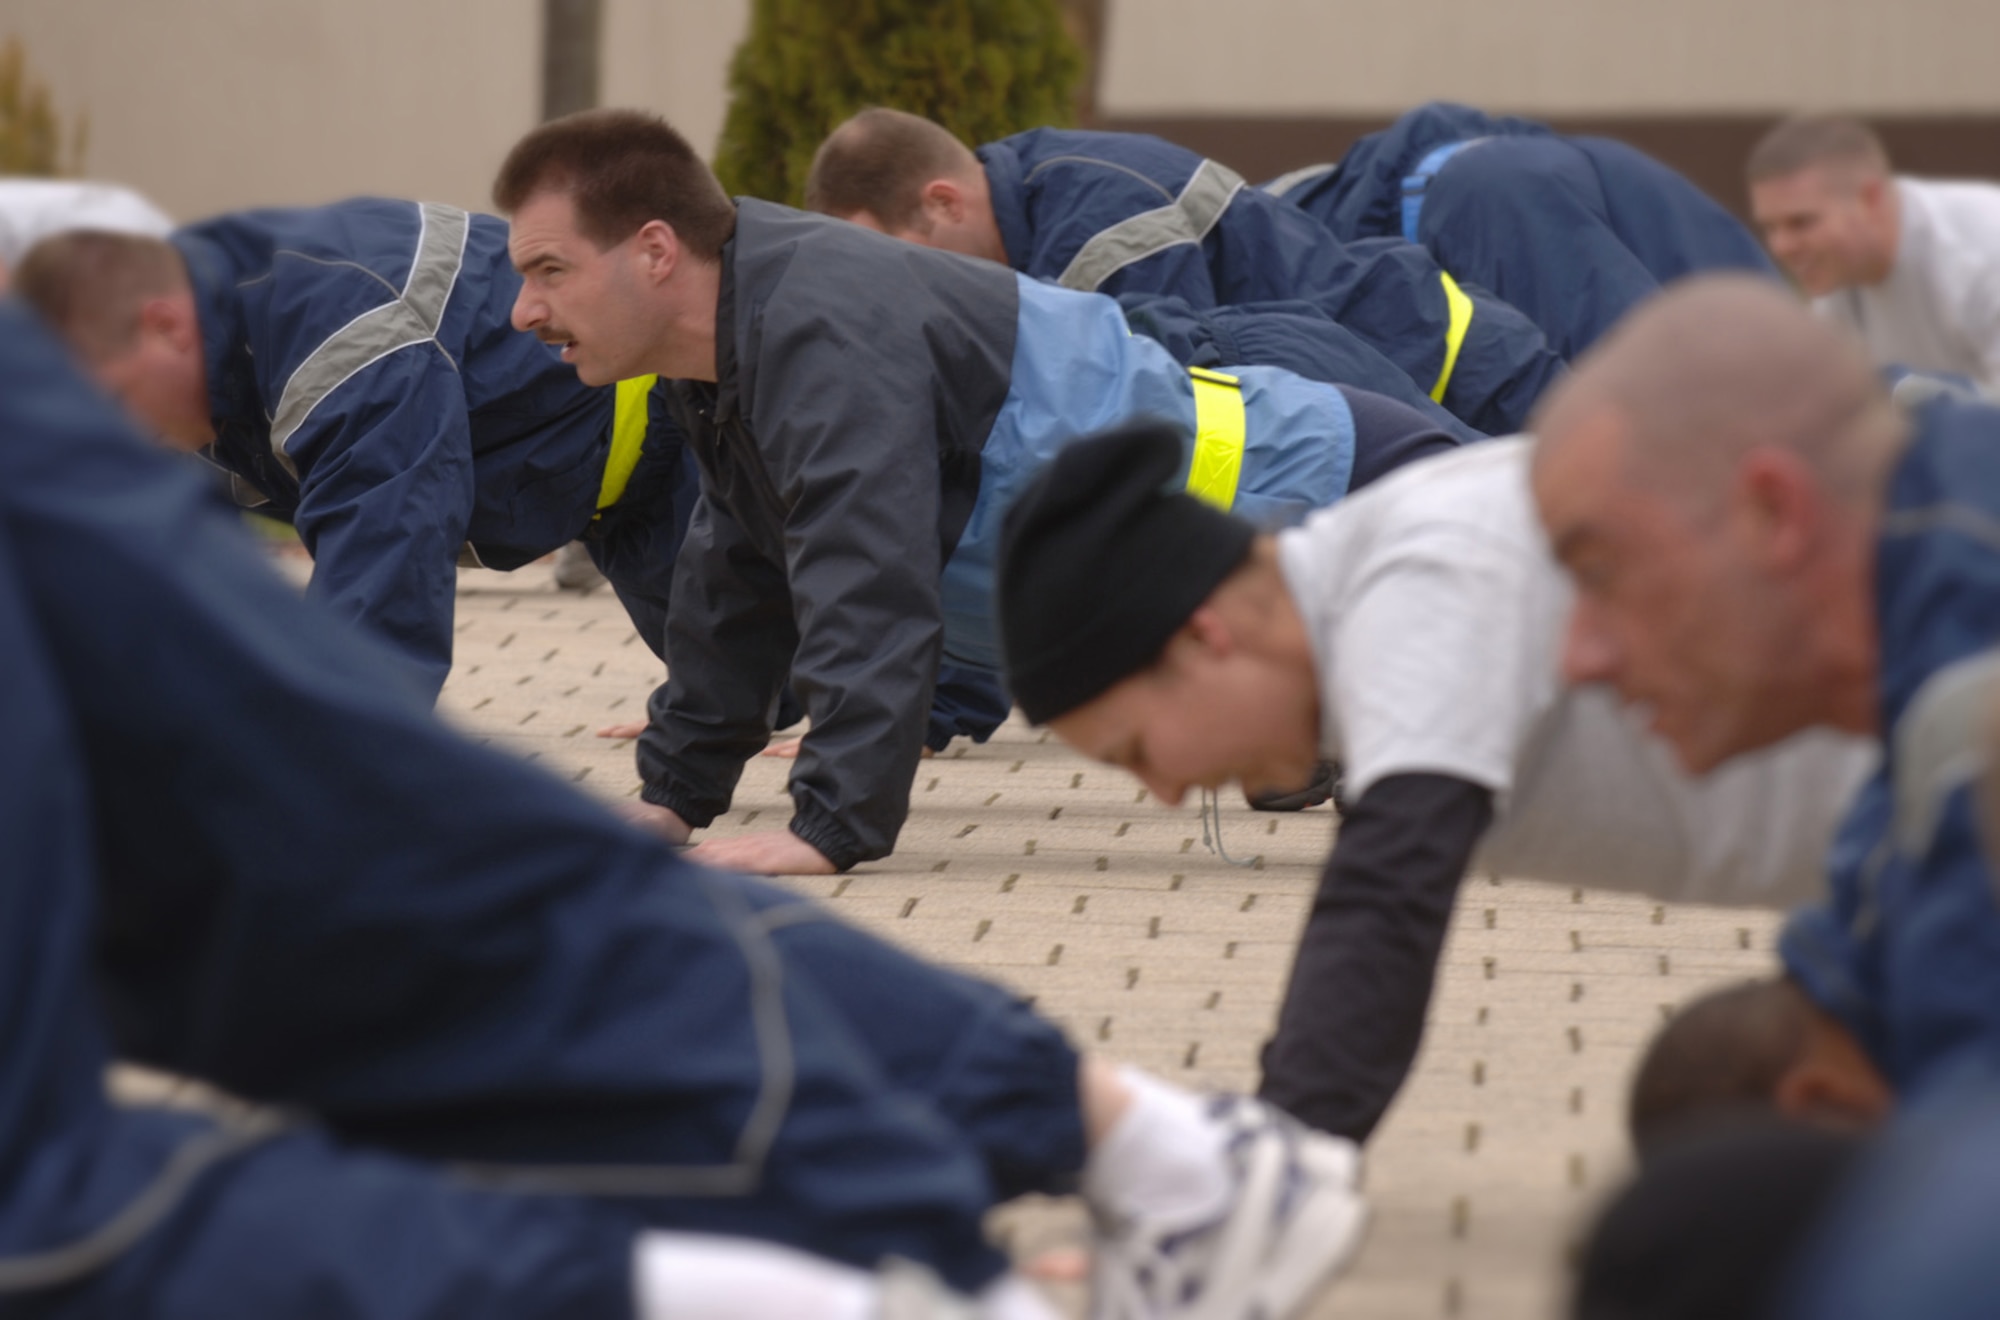 German Air Force Master Sgt. Holger Fels joins fellow Kisling Noncommissioned Officer Academy students in a daily physical training session at Kapaun Air Station, Germany. Sergeant Fels, a German NCO Academy instructor in Appen, Germany, voluntarily enrolled in the six-week academy course designed for U.S. Air Force technical sergeants to prepare for a four-year special duty assignment as an exchange instructor at the Senior NCO Academy at Maxwell Air Force Base, Alabama. Photo by Master Sgt. Scott Wagers